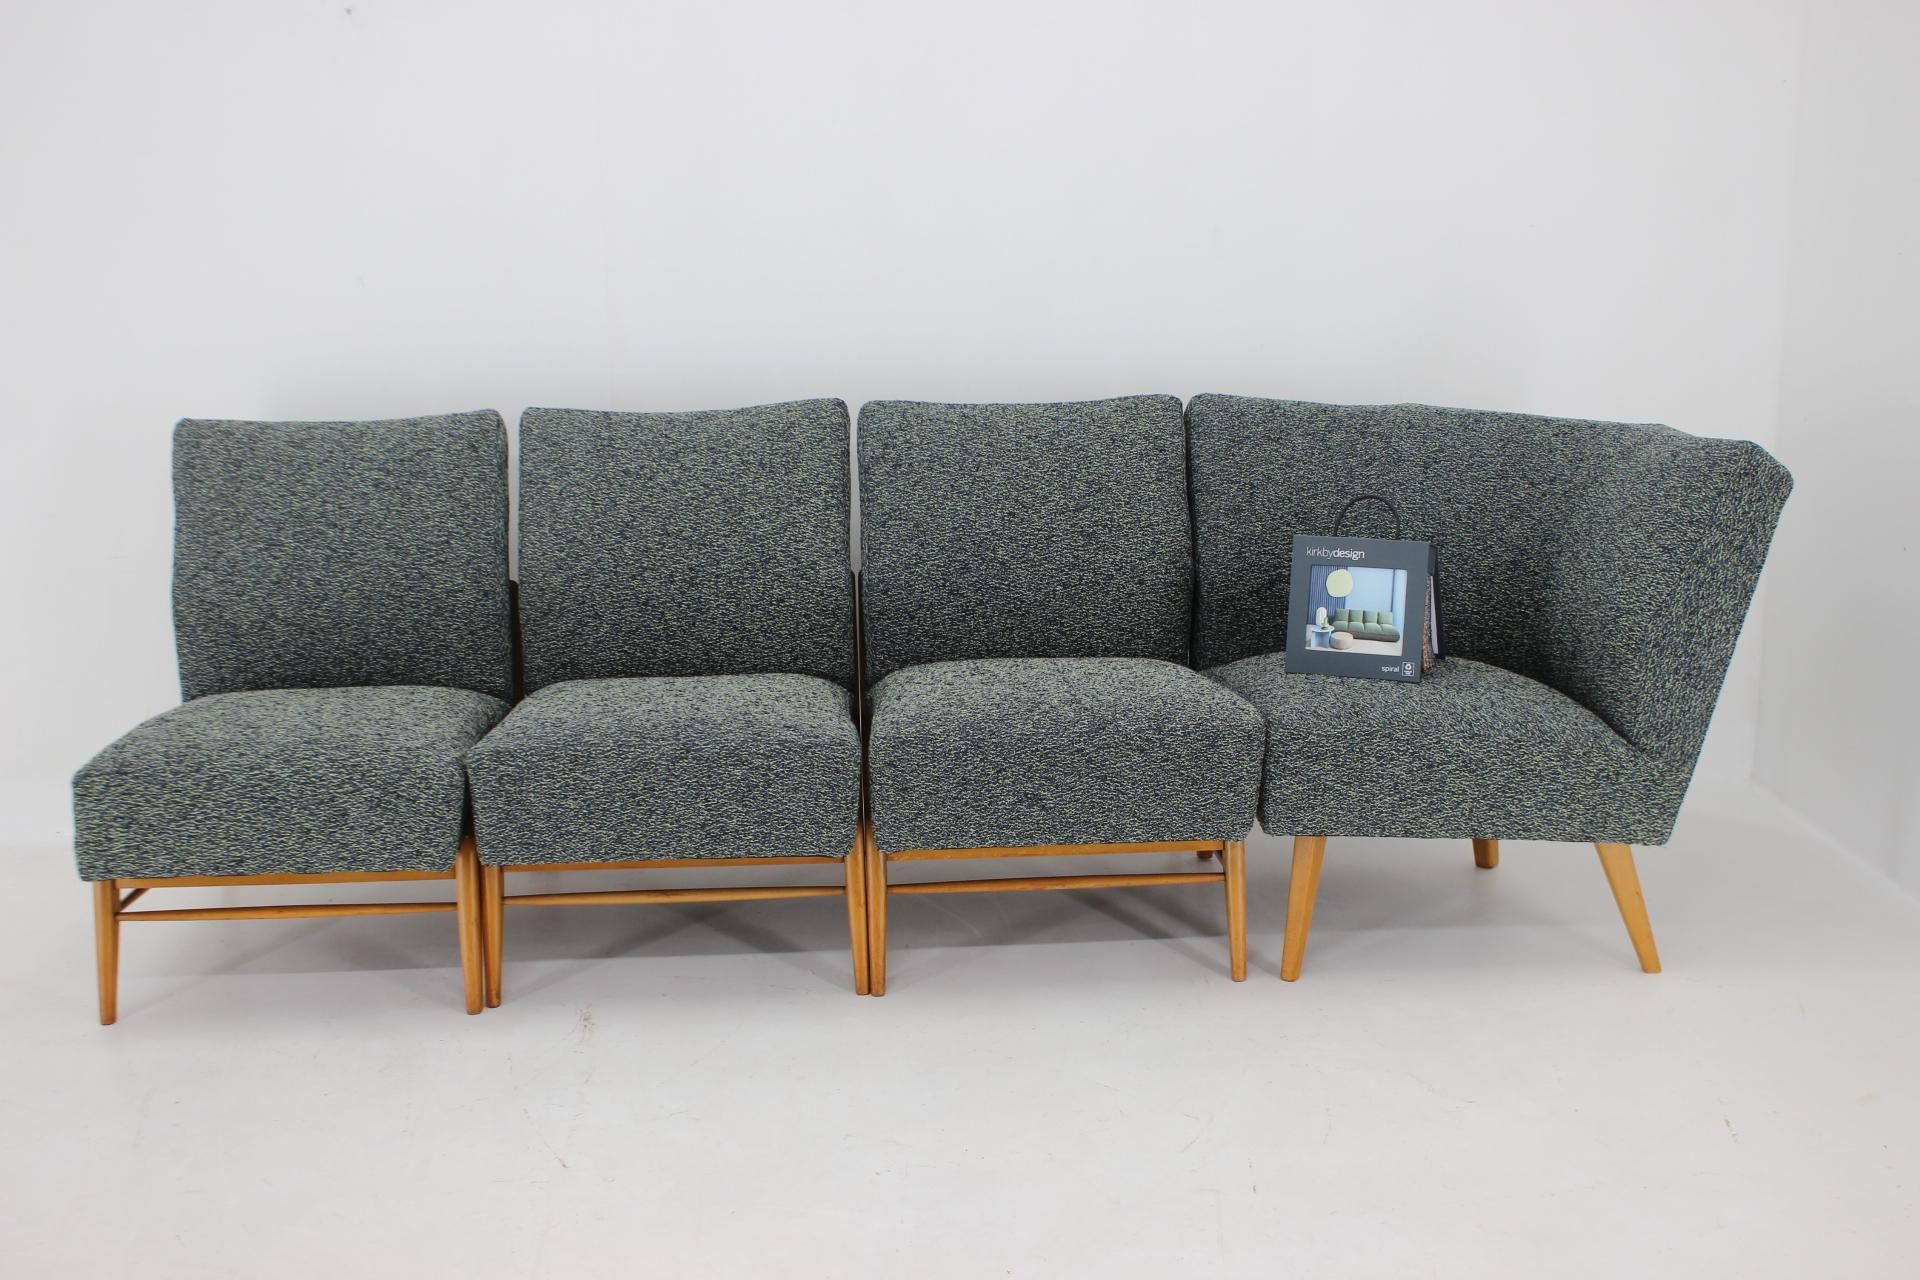 1970s Modular Sofa or Chairs in Beech wood and Kirgby Fabric, Czechoslovakia For Sale 5